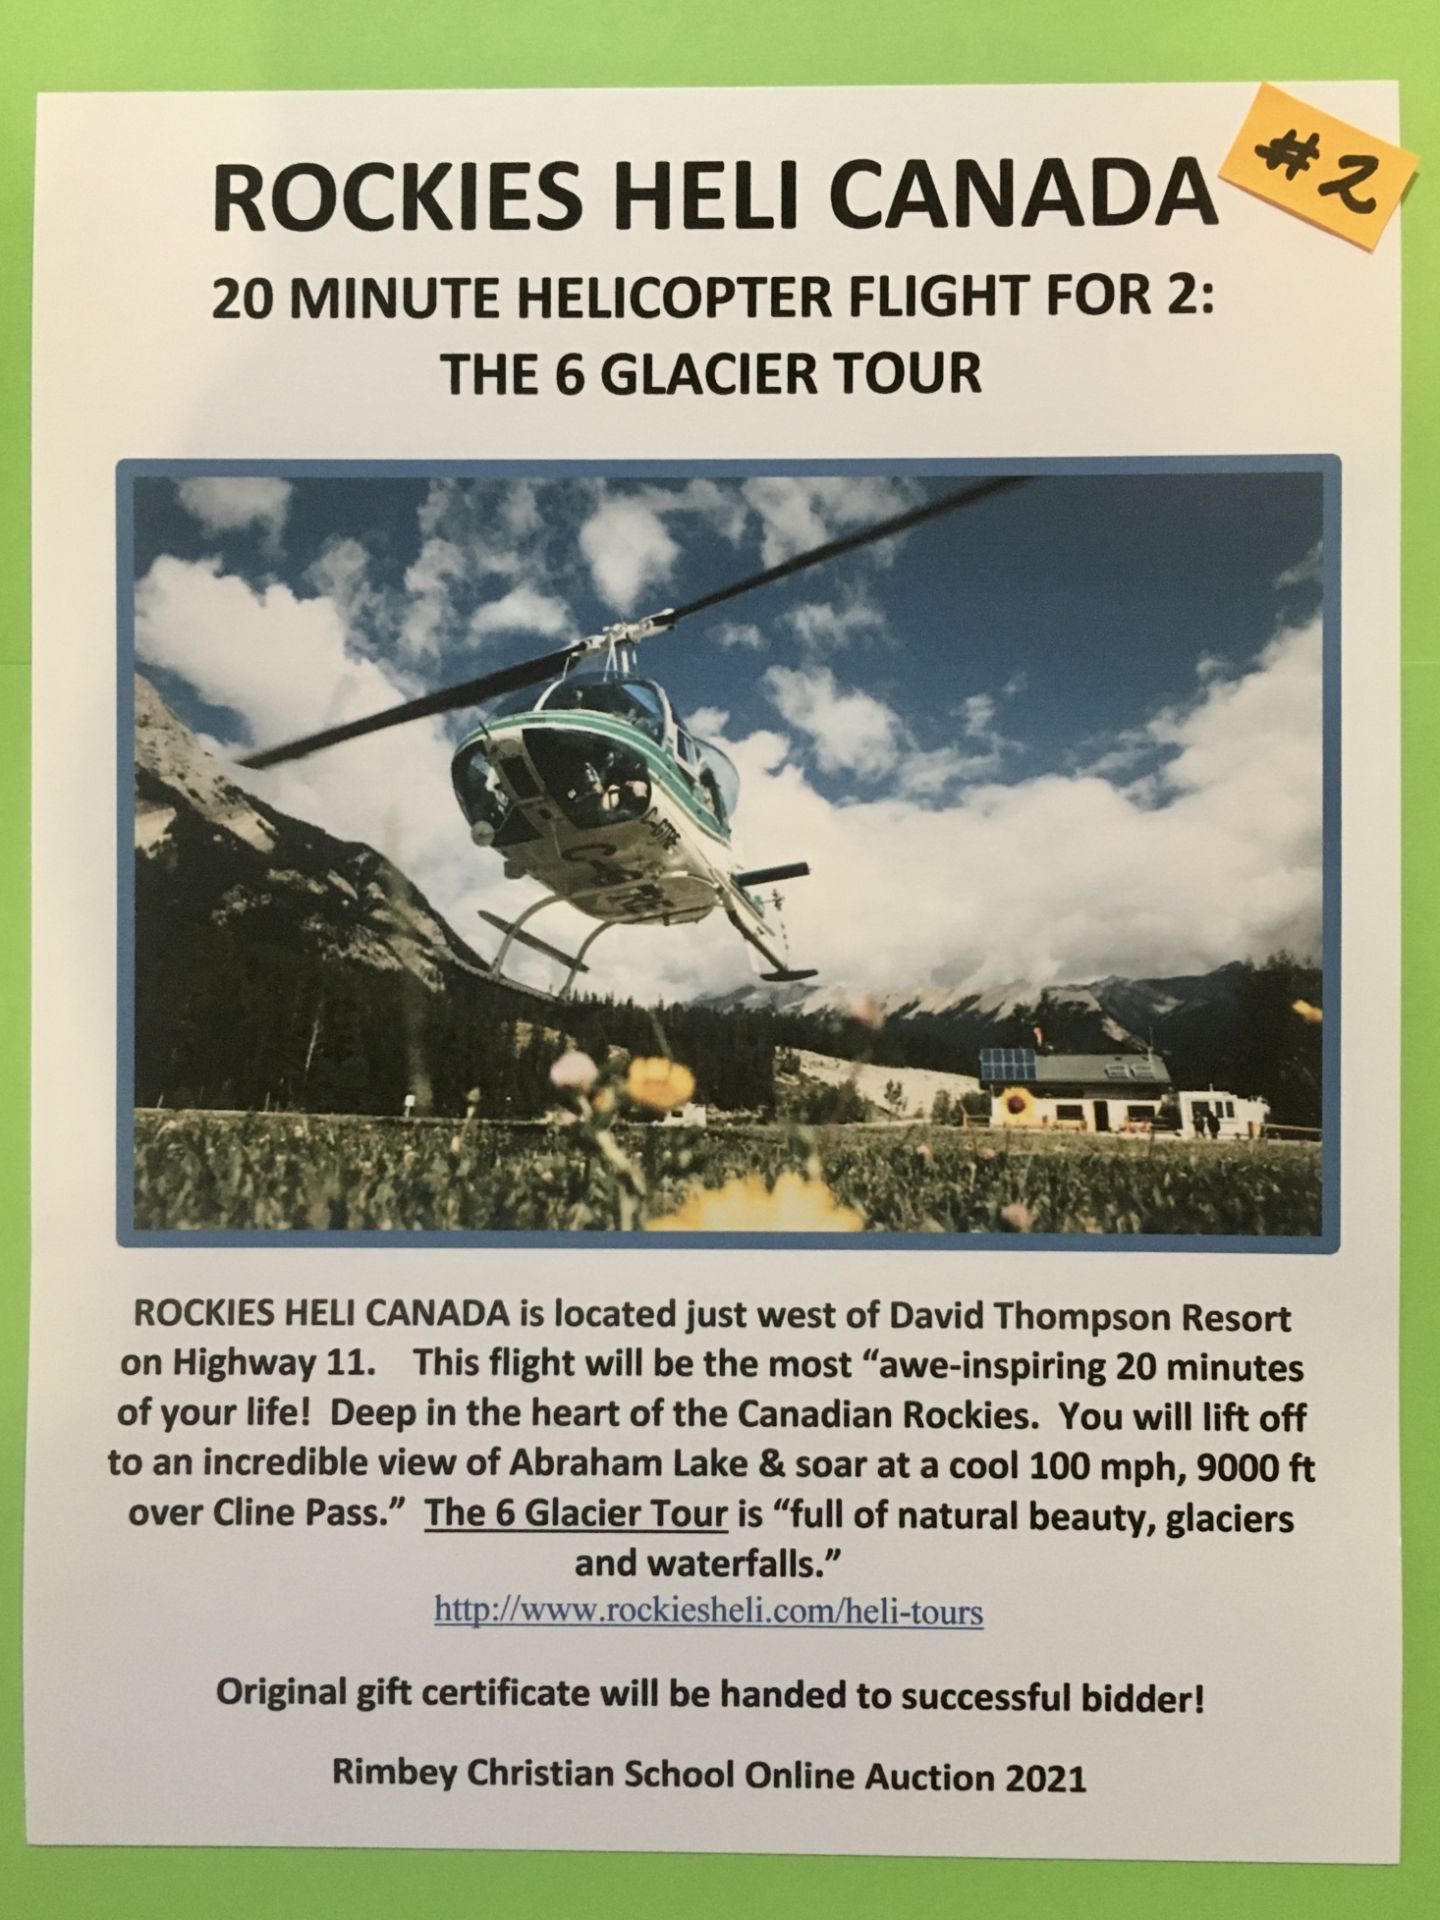 20 MINUTE HELICOPTER FLIGHT FOR 2: THE 6 GLACIER TOUR ROCKIES HELI CANADA is located west of